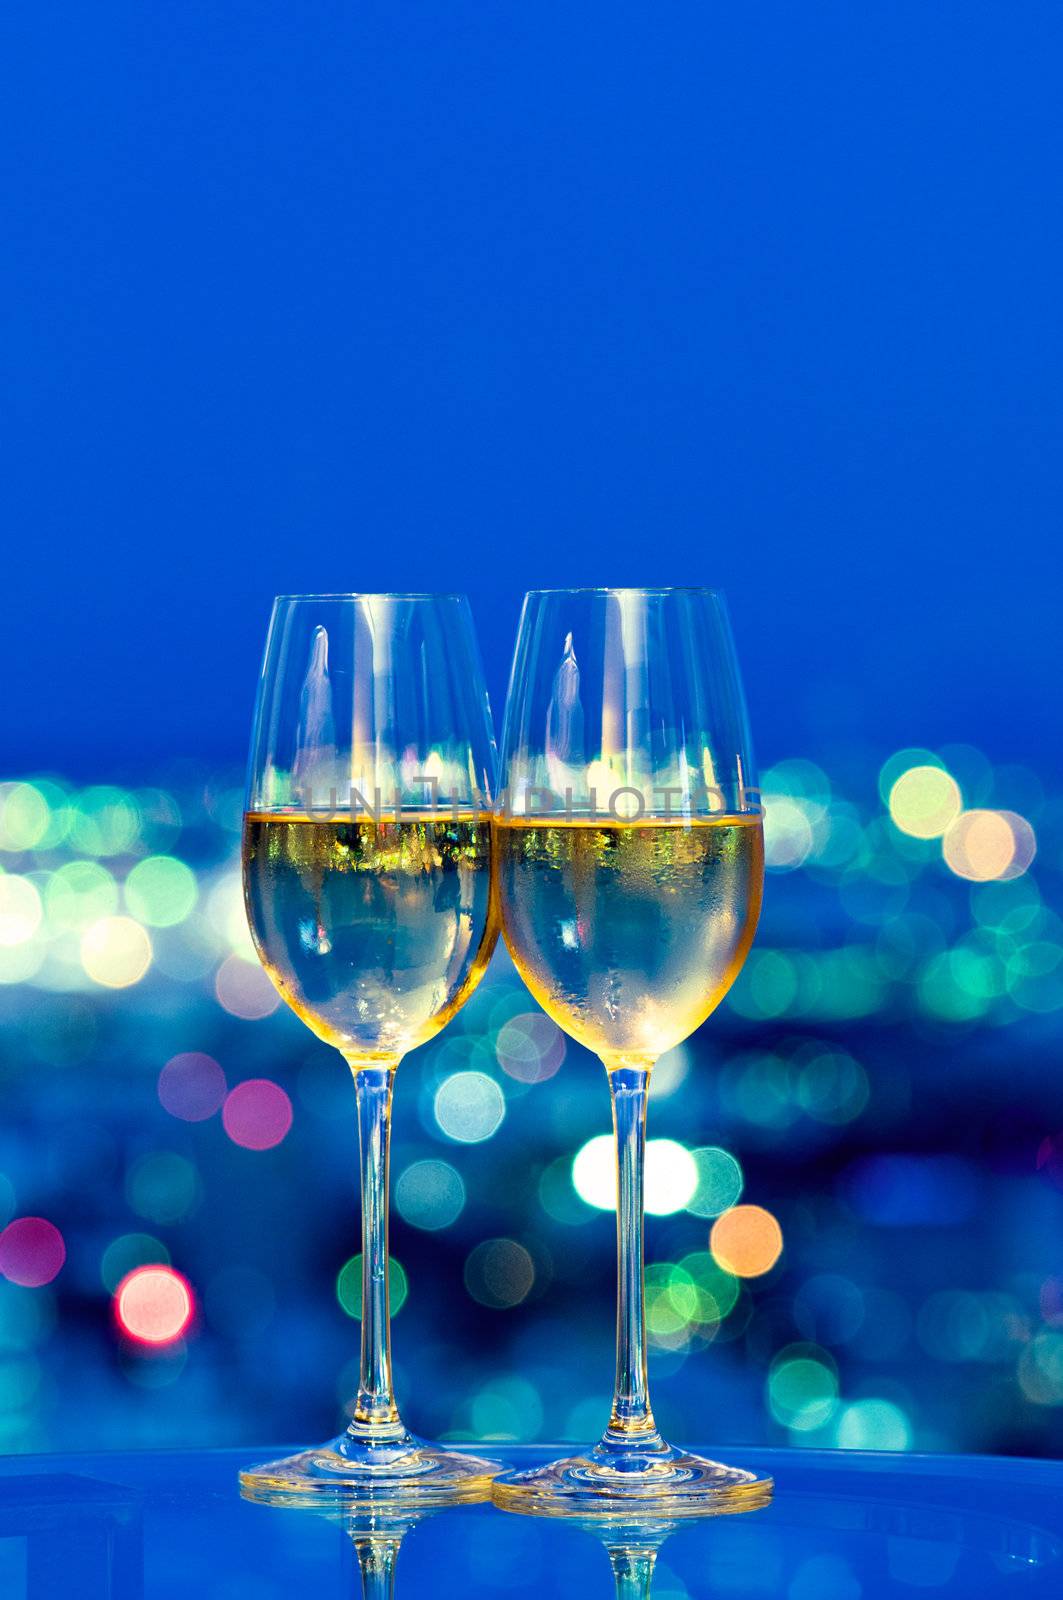 Champagne glasses in front of a window in the night sky